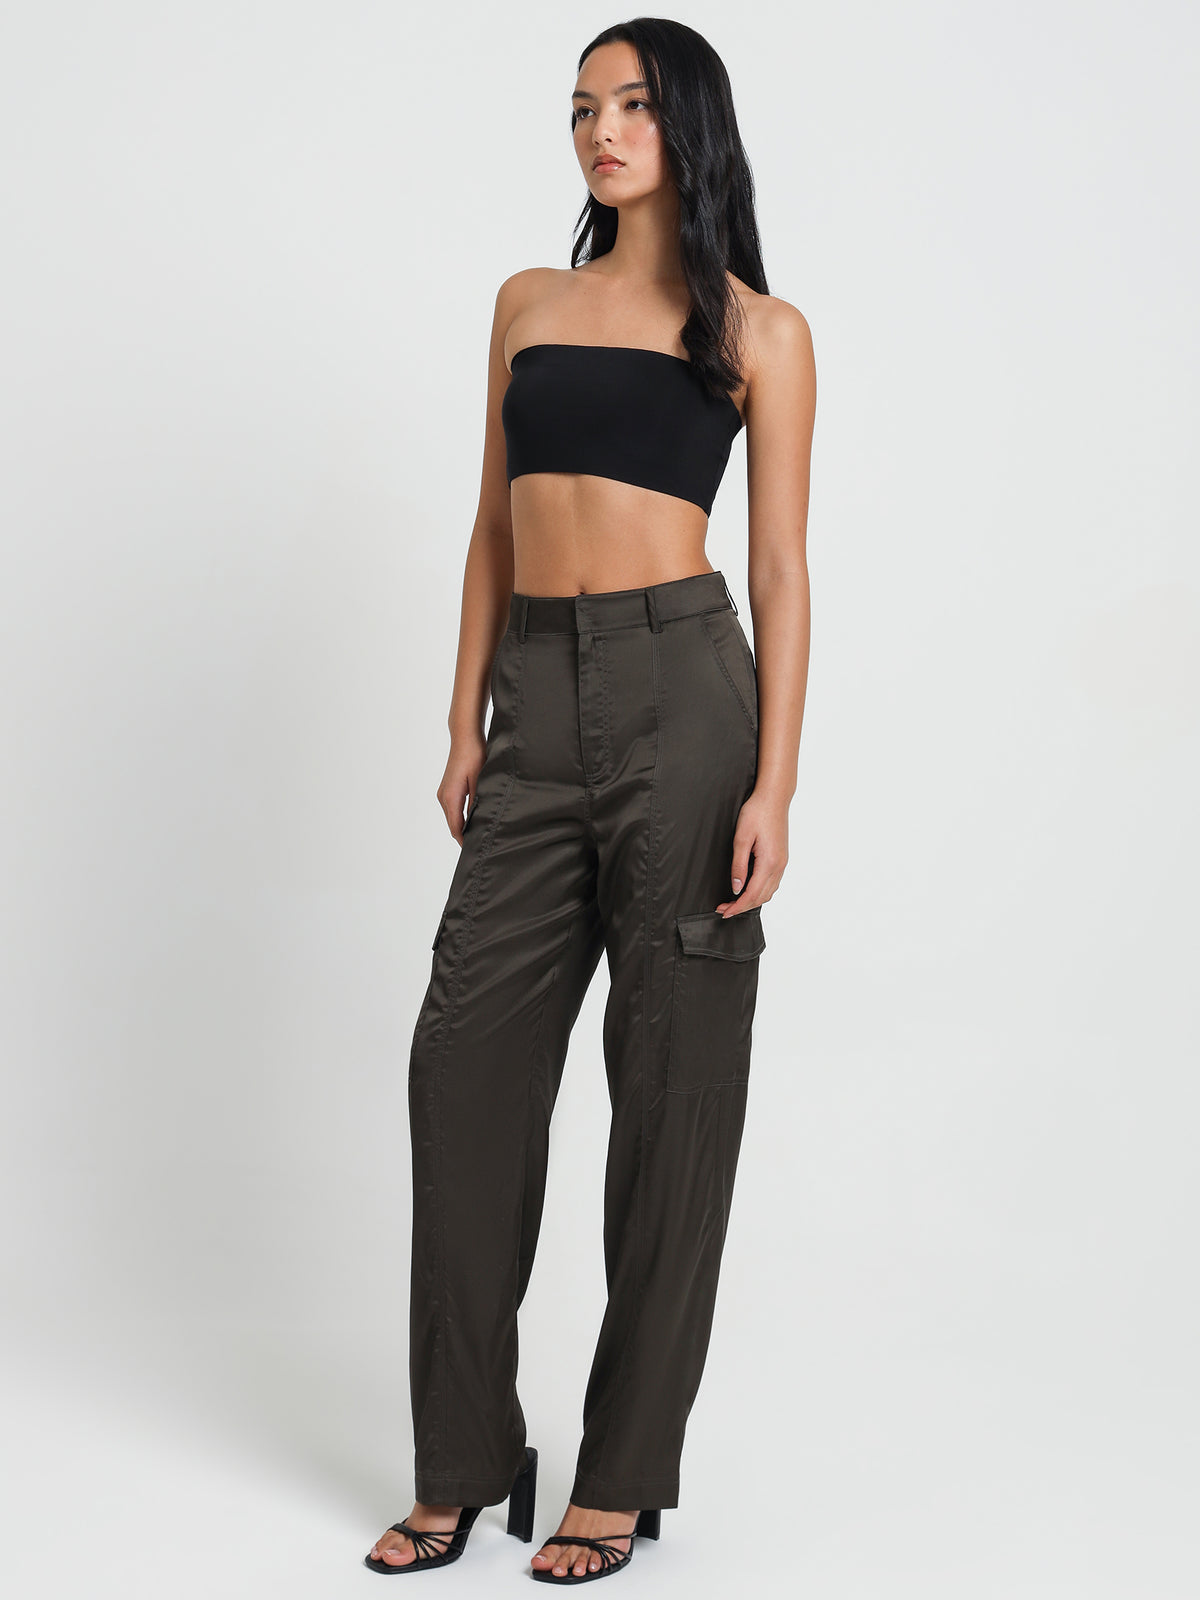 Suvi Satin Cargo Pants in Deep Olive